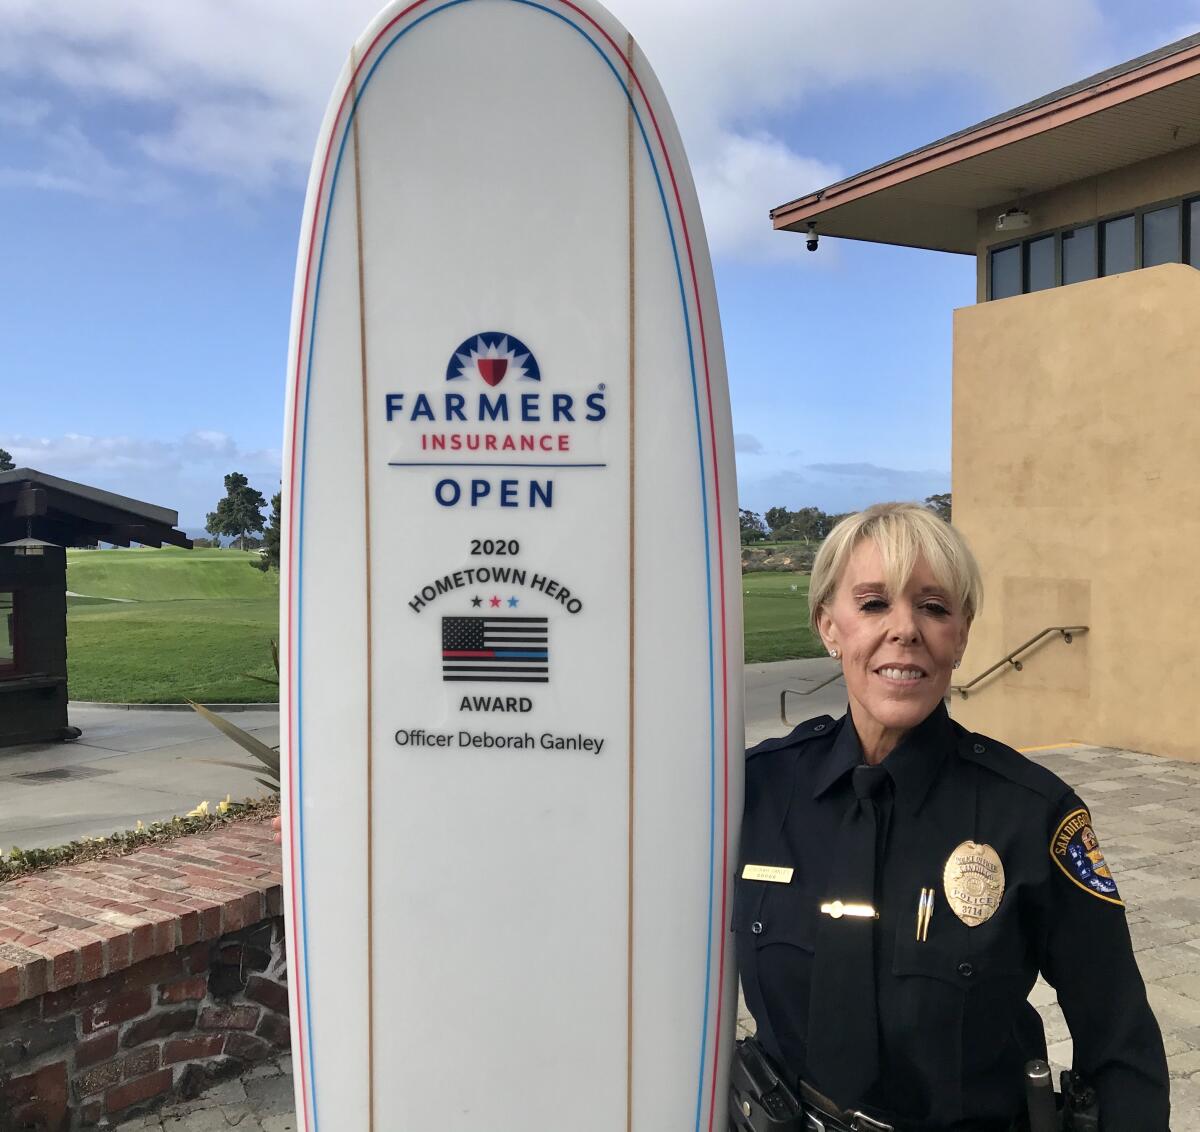 Police officer Debbie Ganley has guarded and guided players ranging from Tiger Woods and Phil Mickelson to Ernie Els and John Daly at San Diego's annual PGA Tour stop.